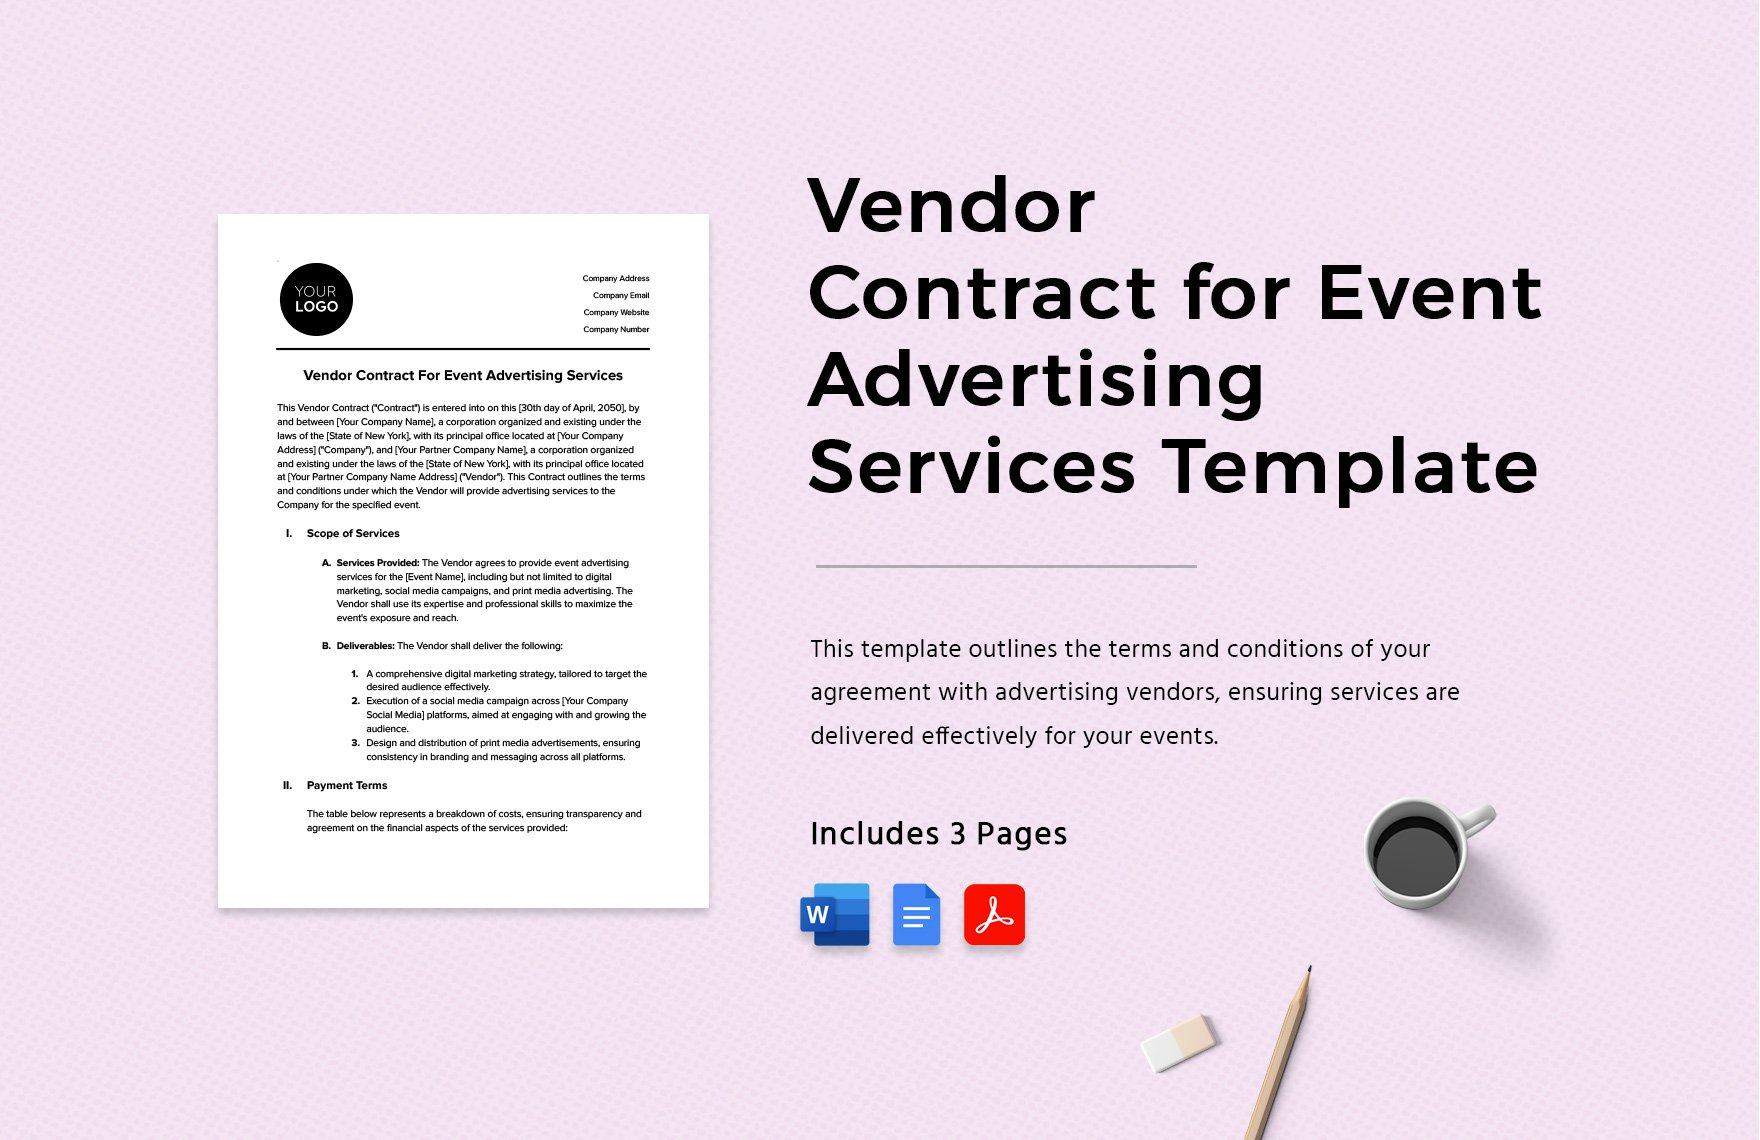 Vendor Contract for Event Advertising Services Template